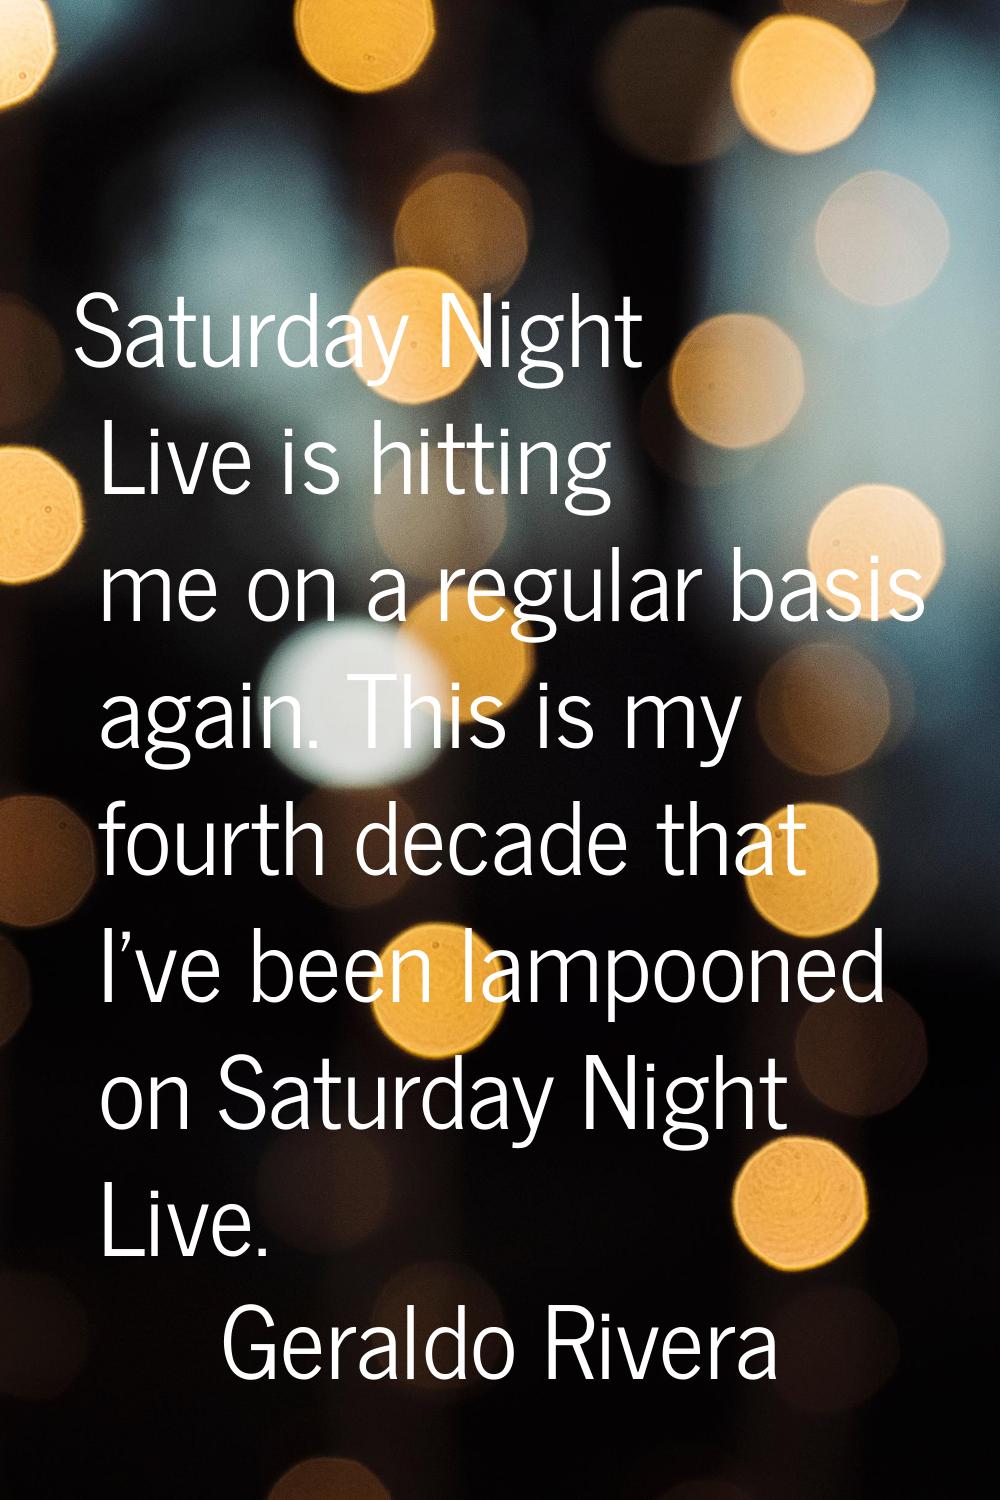 Saturday Night Live is hitting me on a regular basis again. This is my fourth decade that I've been